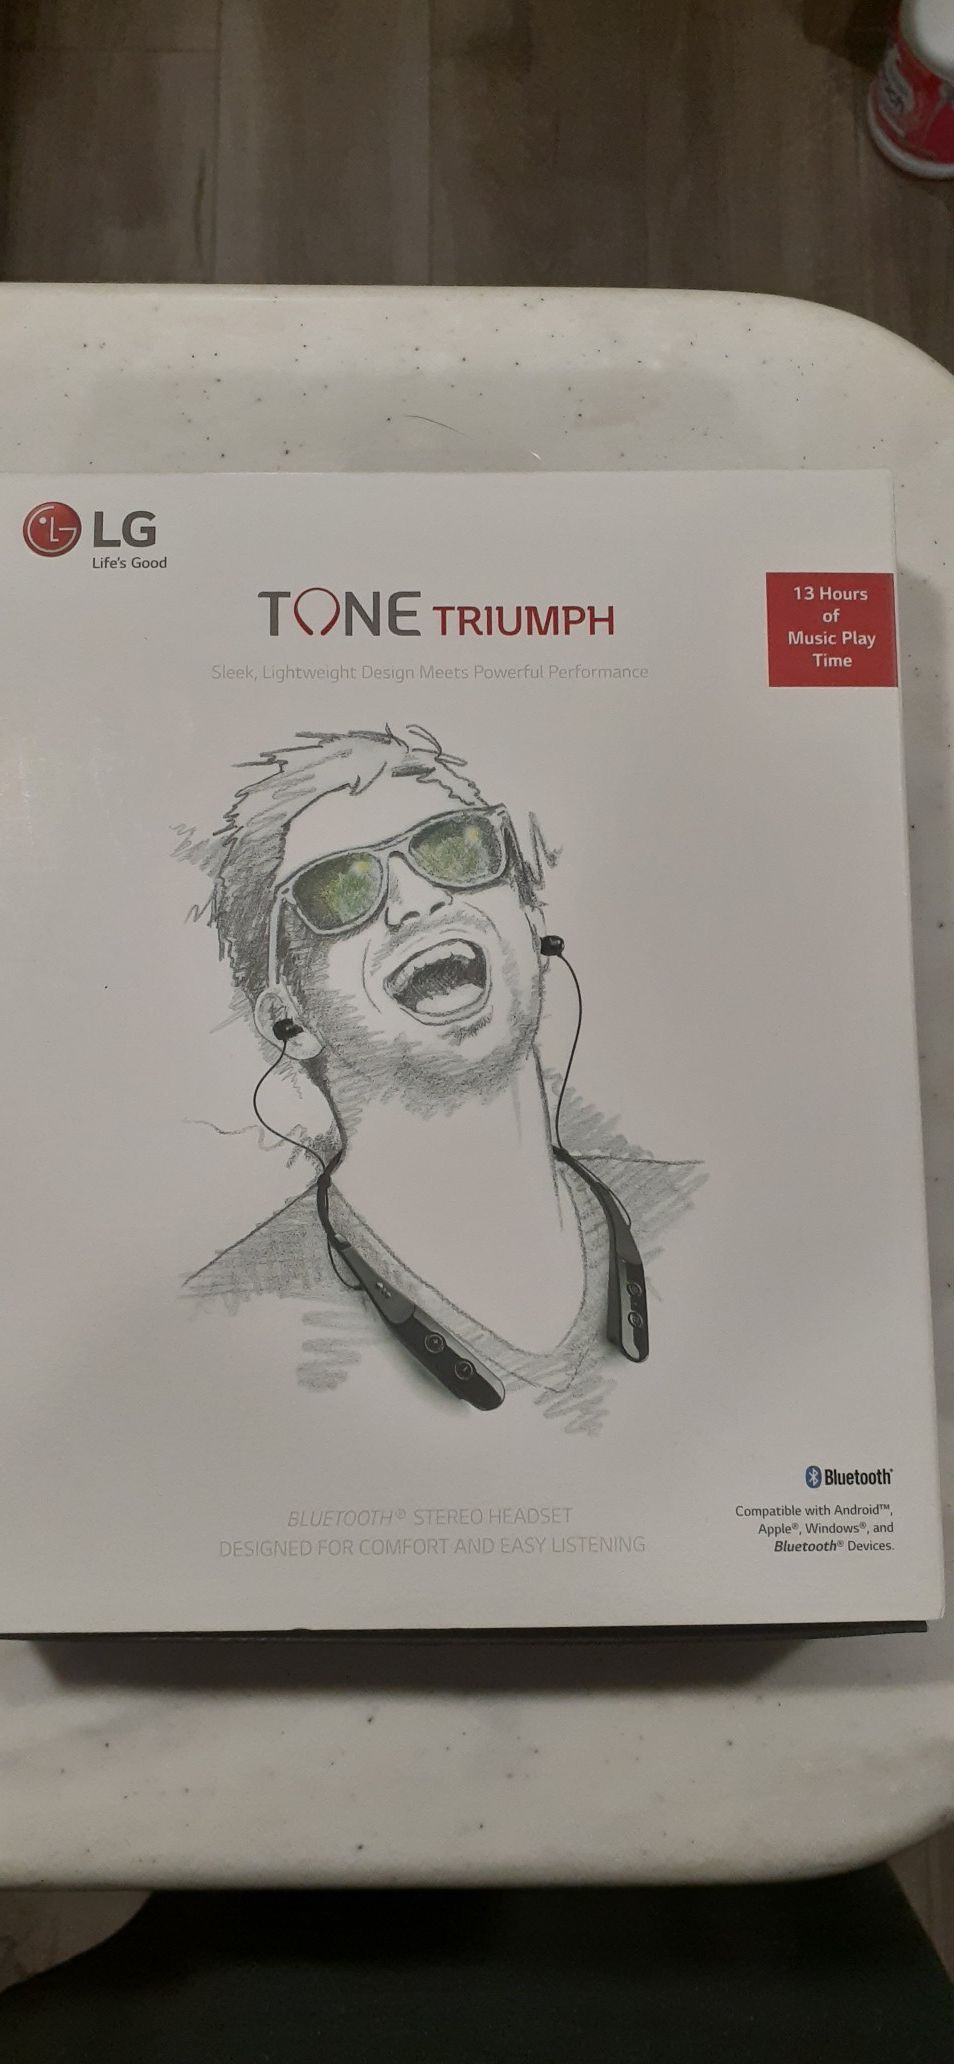 LG TONE TRIUMPH, BLUETOOTH STEREO HEADSET, DESIGNED FOR COMFORT AND POWERFUL PERFORMANCE.